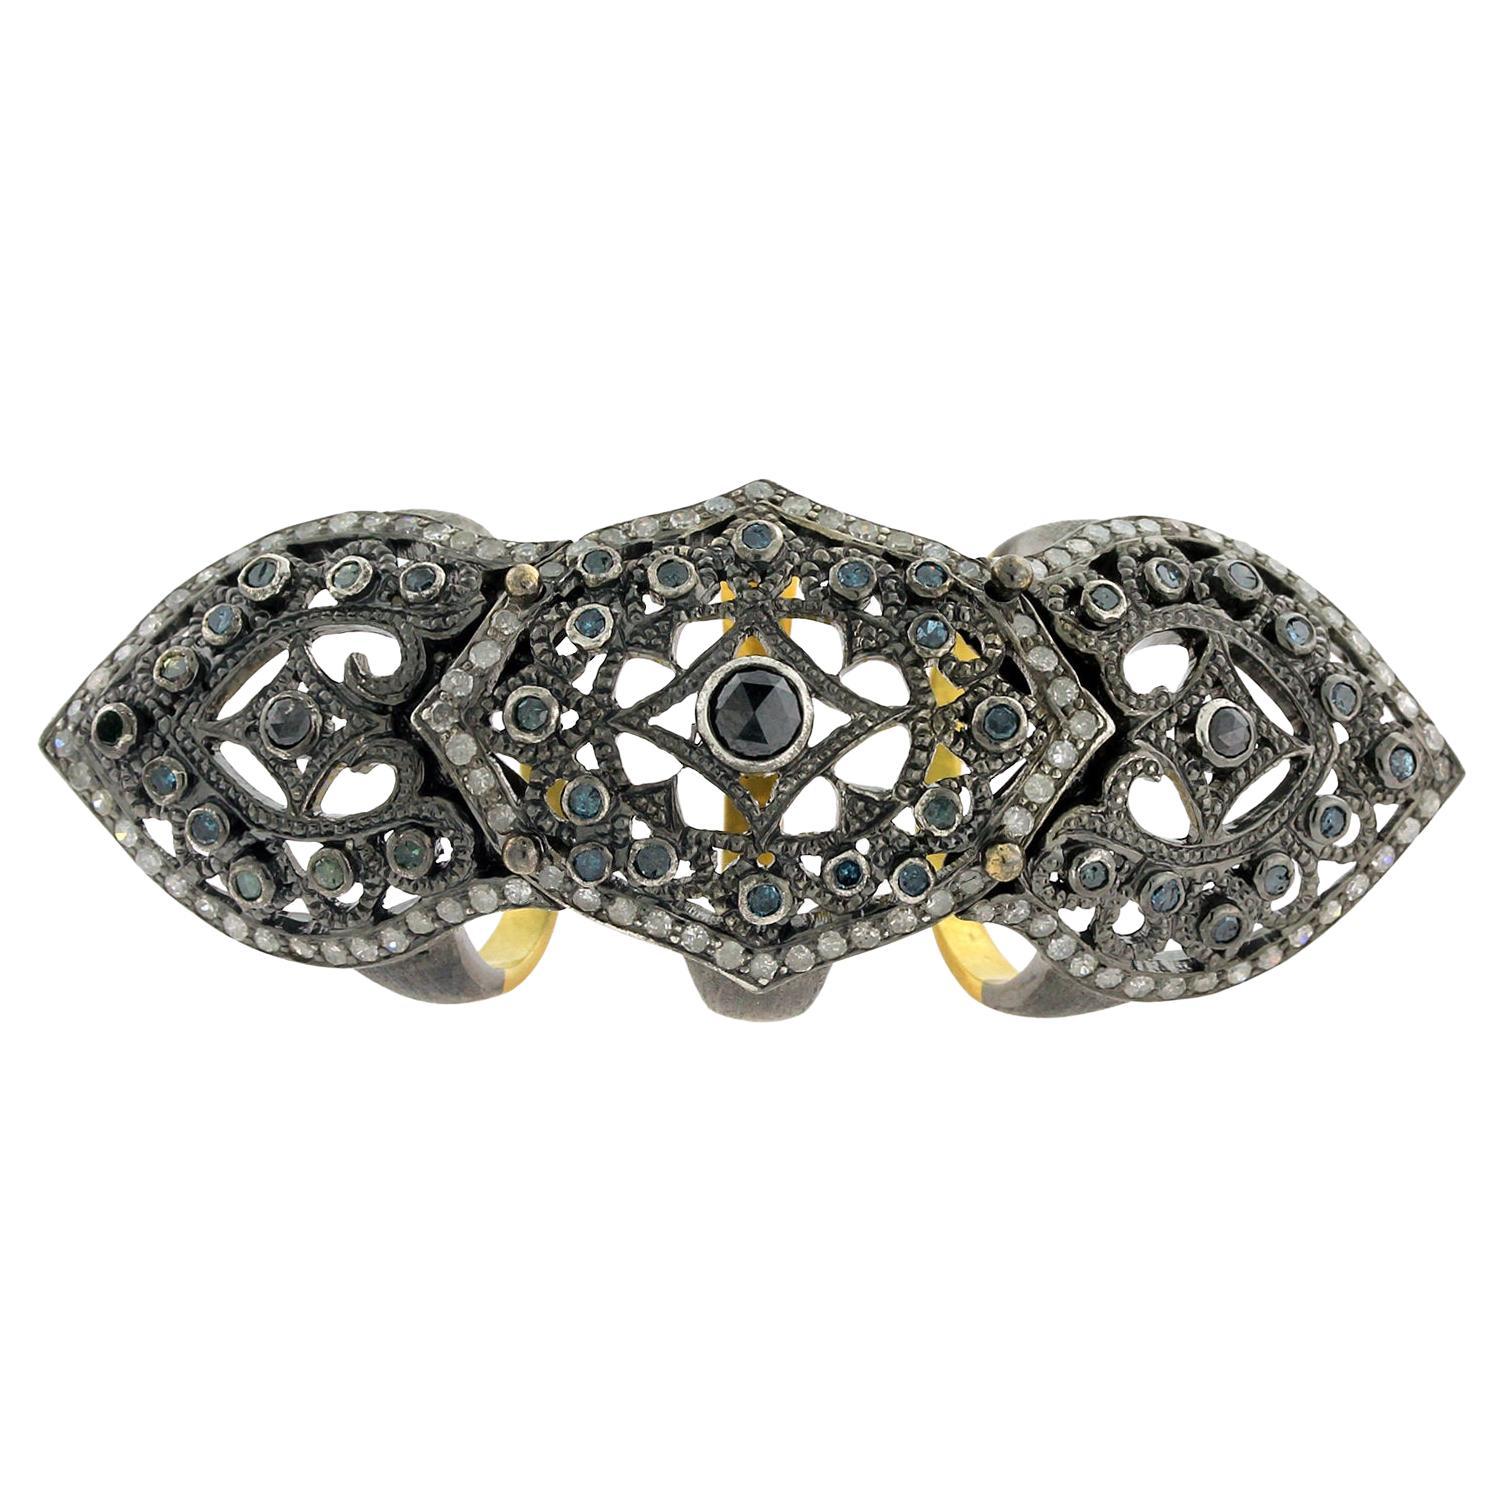 Fancy Diamonds & Pave Diamonds Long Knuckle Ring Made in 18k Gold & Silver